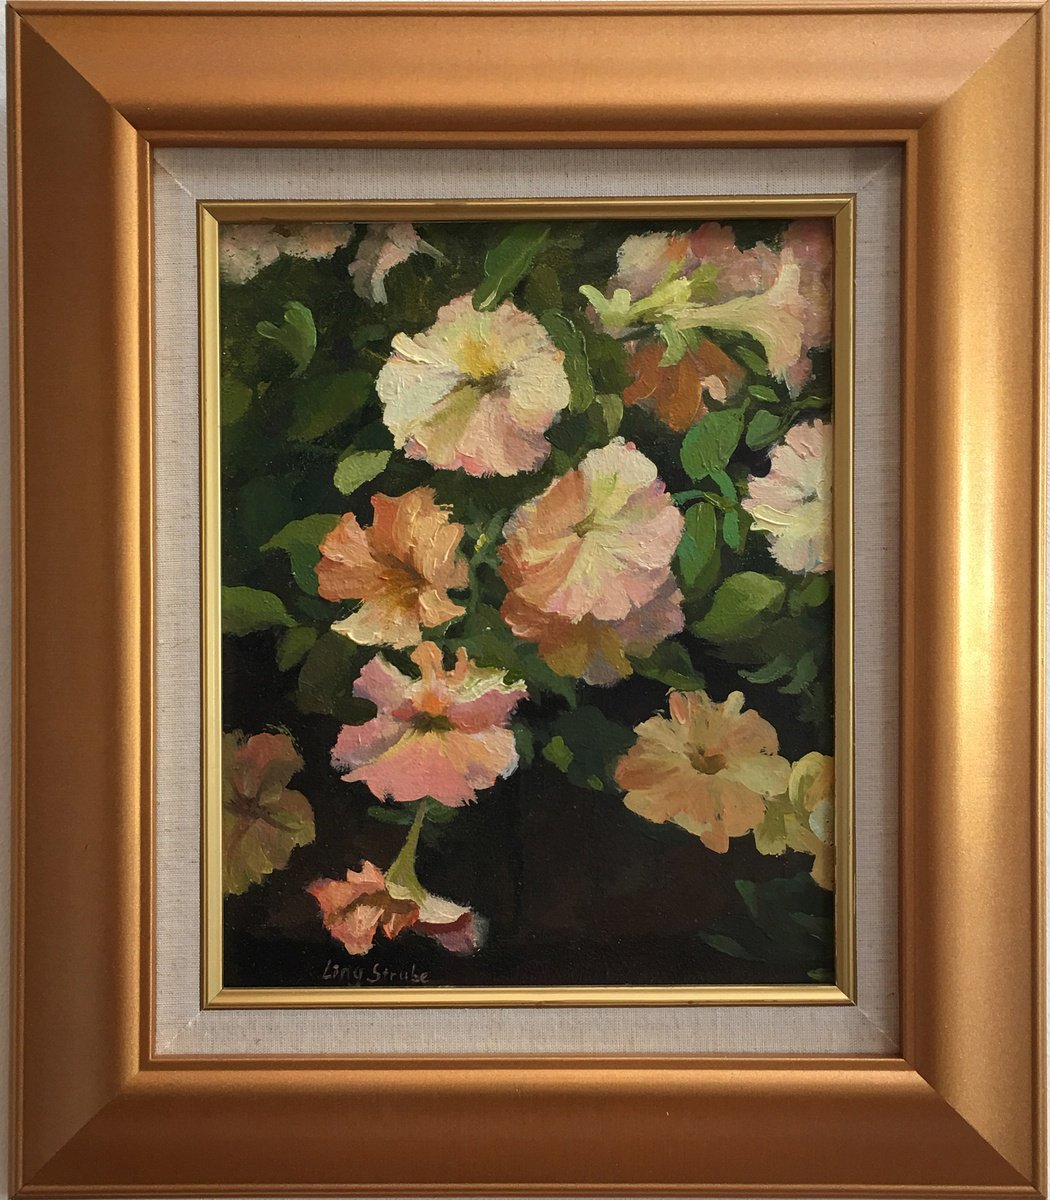 Petunias (Framed) by Ling Strube